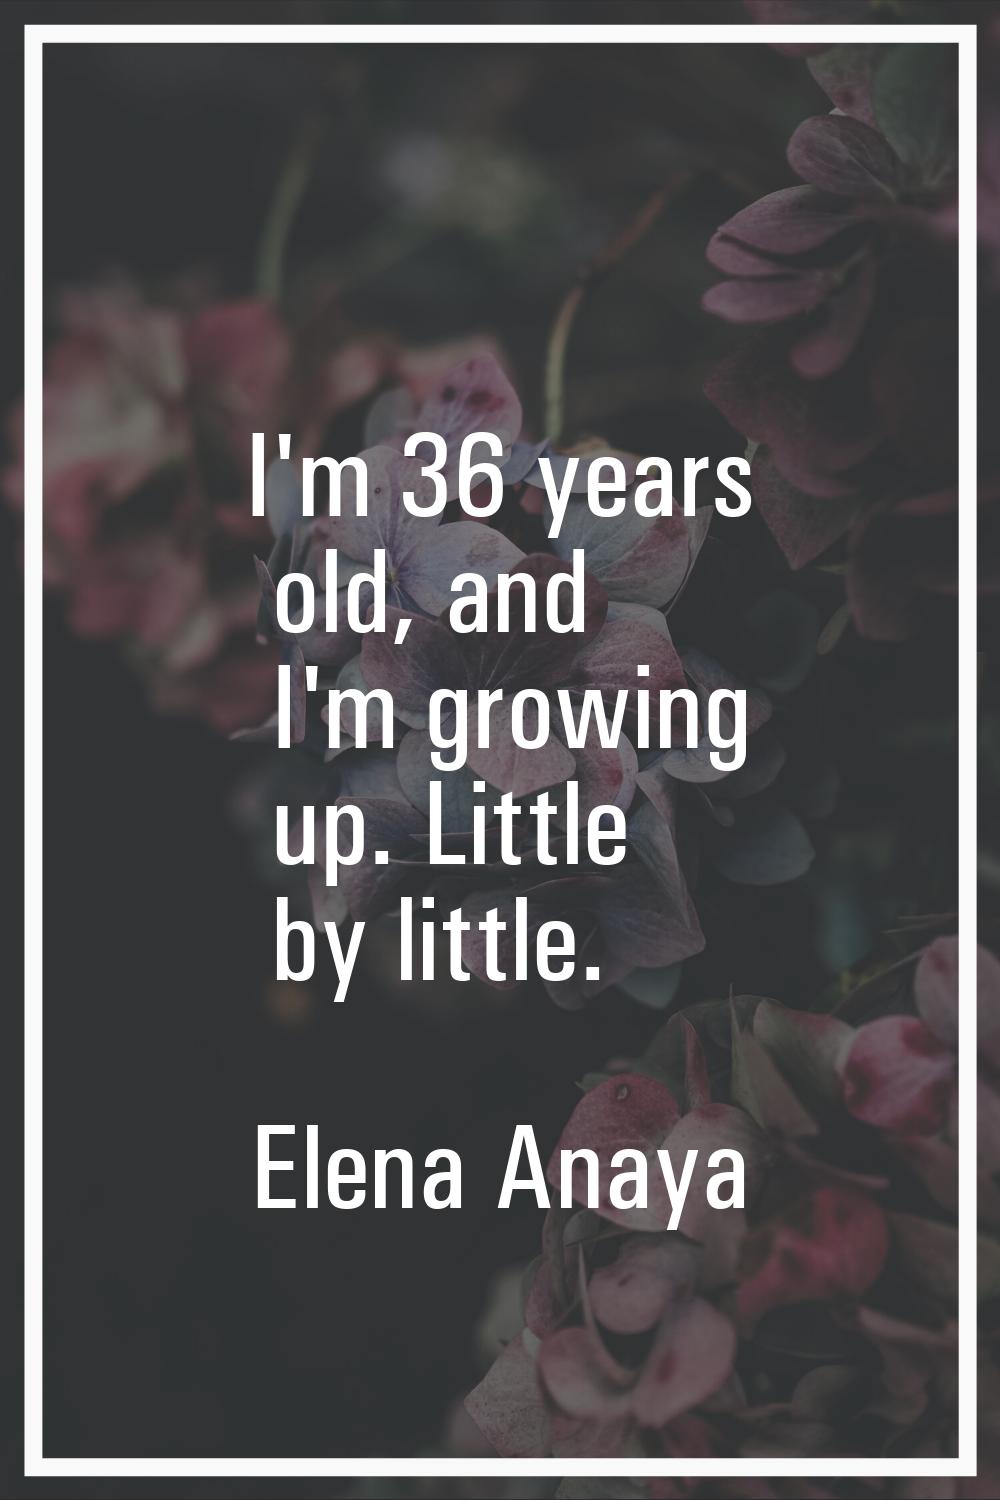 I'm 36 years old, and I'm growing up. Little by little.